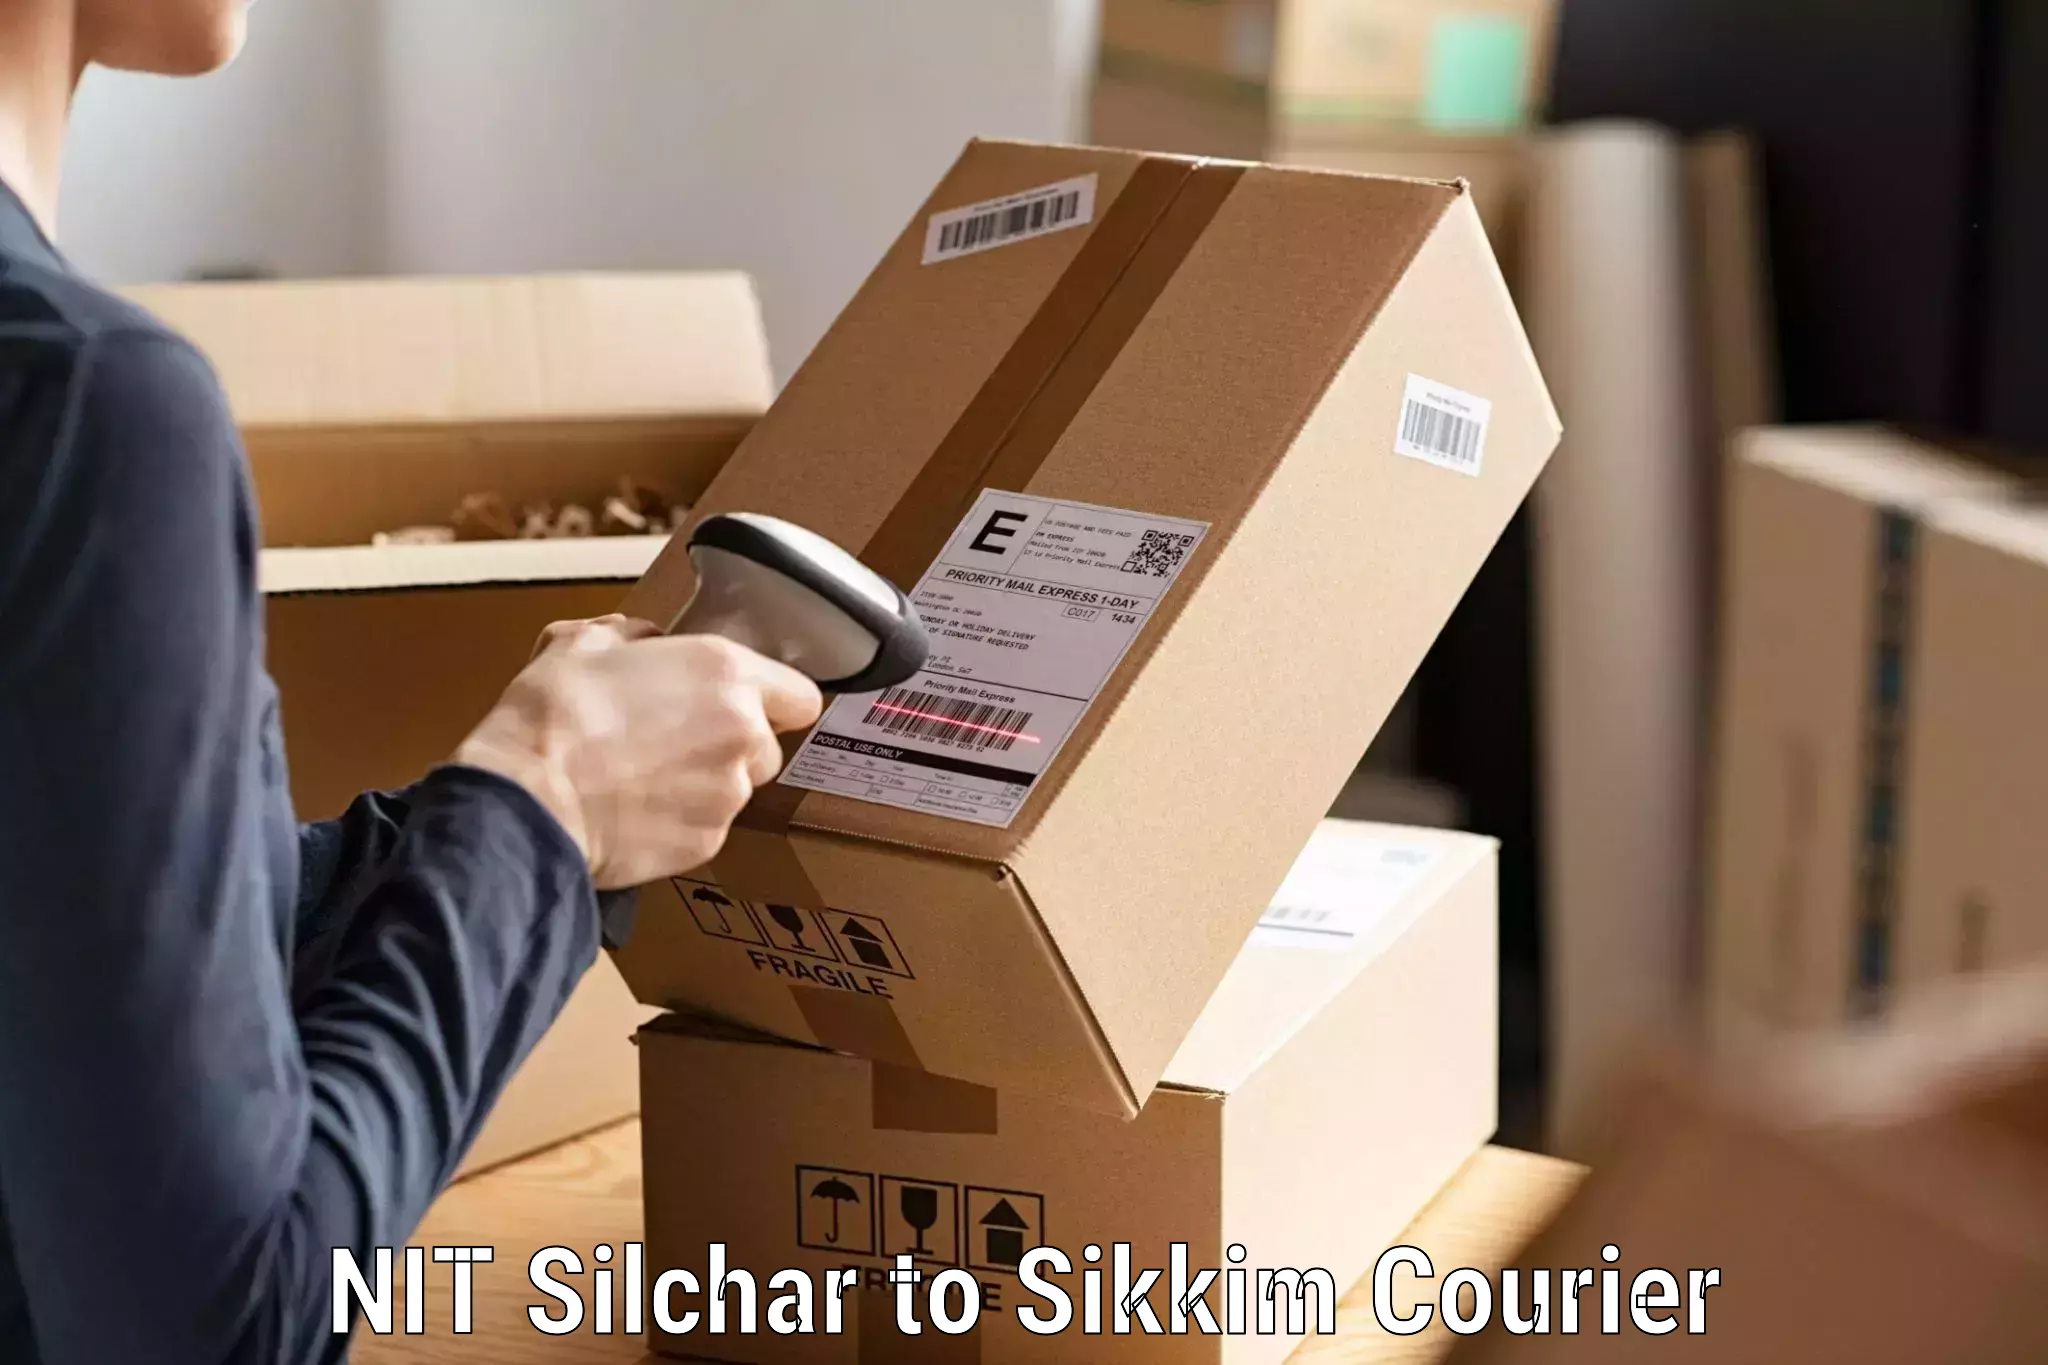 Personal courier services NIT Silchar to Gangtok